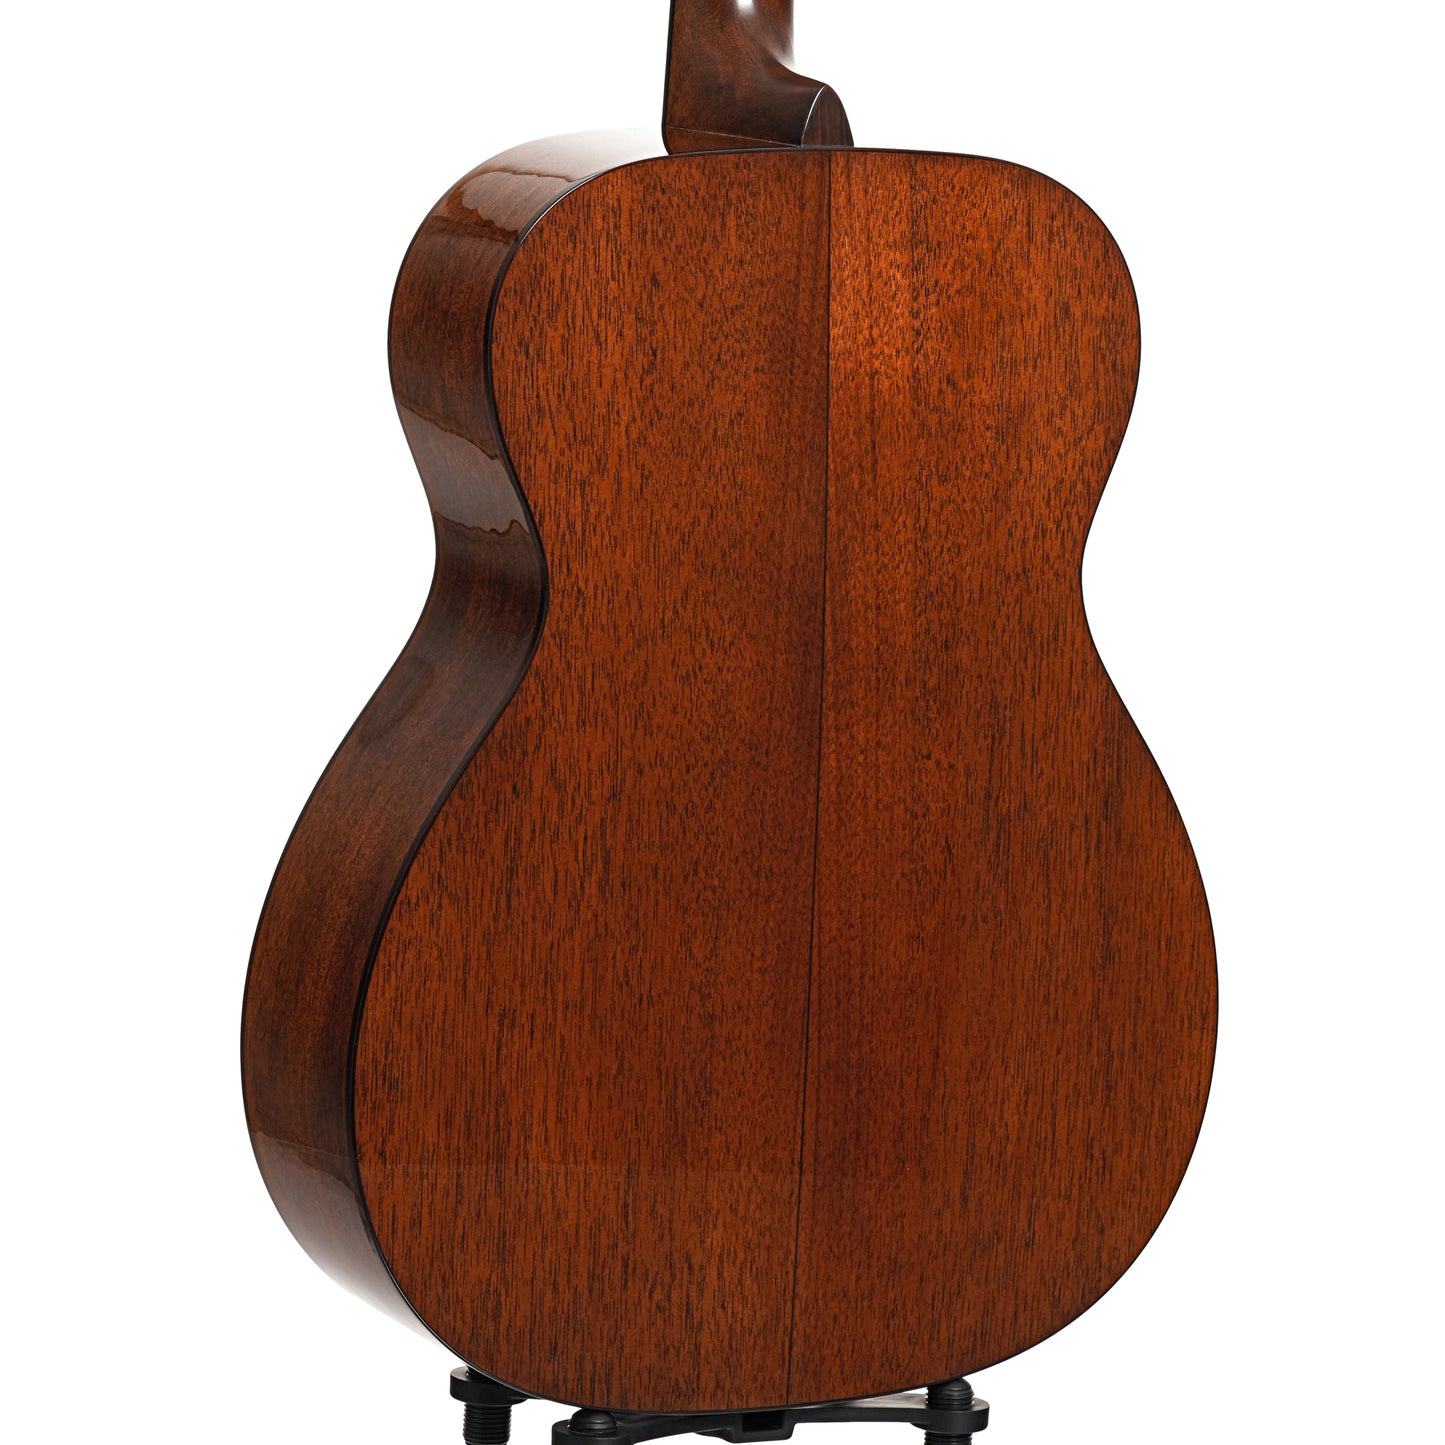 Image 10 of Martin 000-18 Modern Deluxe Guitar & Case- SKU# 00018MDLX : Product Type Flat-top Guitars : Elderly Instruments